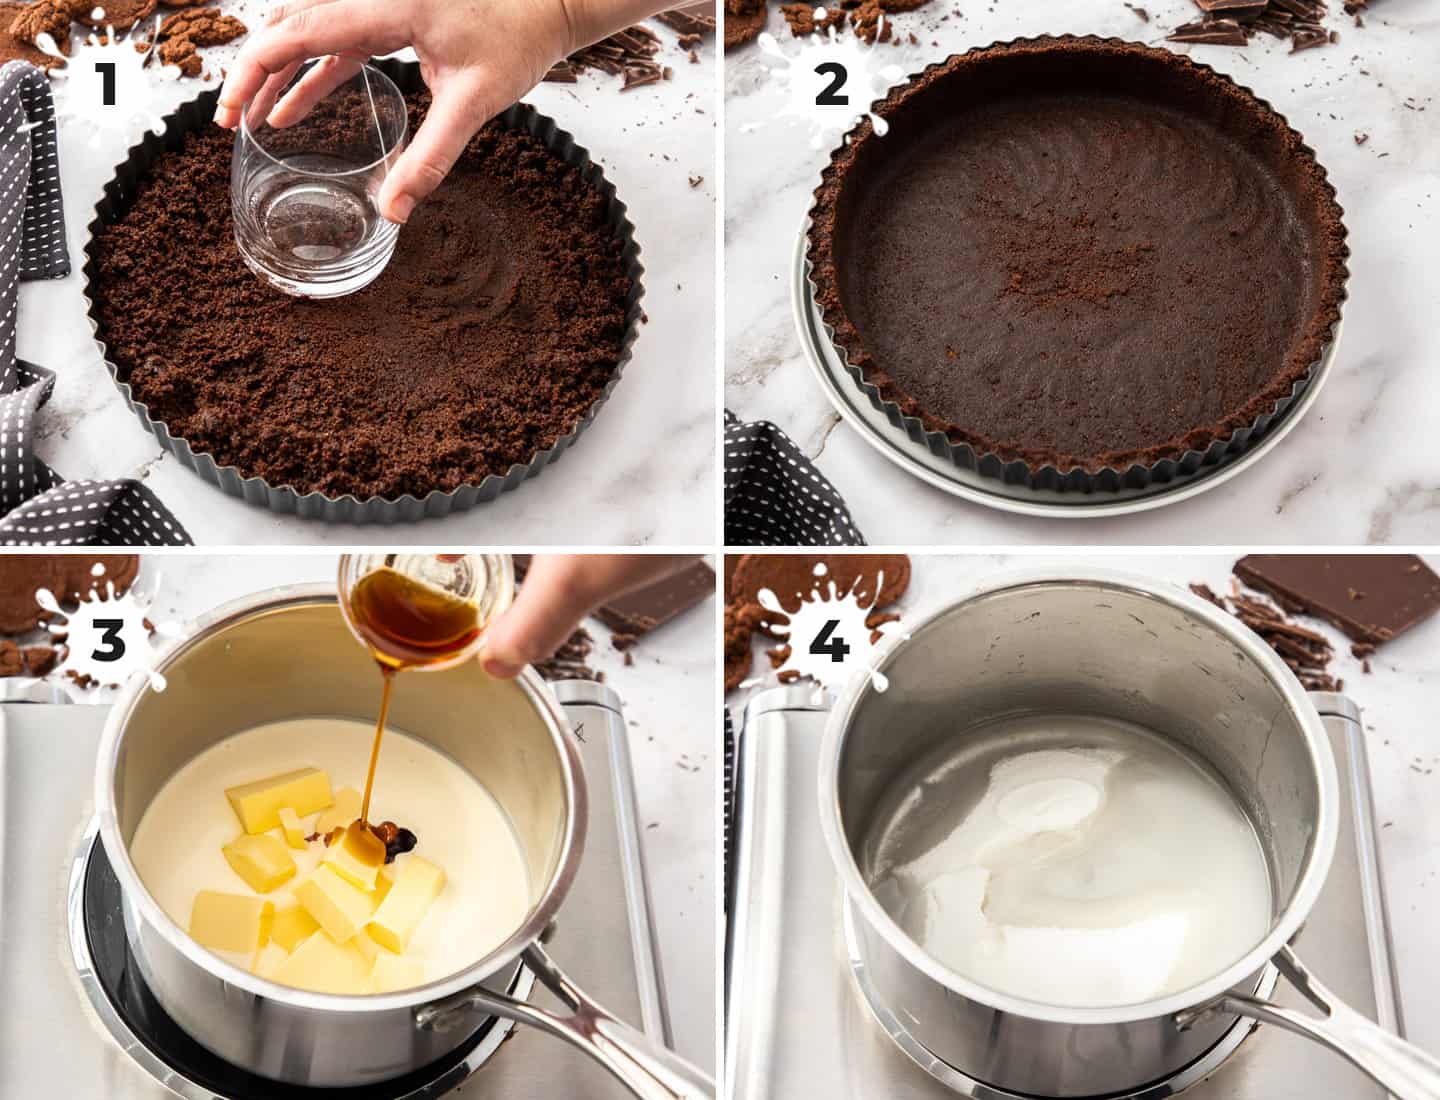 A collage of 4 images showing the making of a chocolate cookie tart shell.